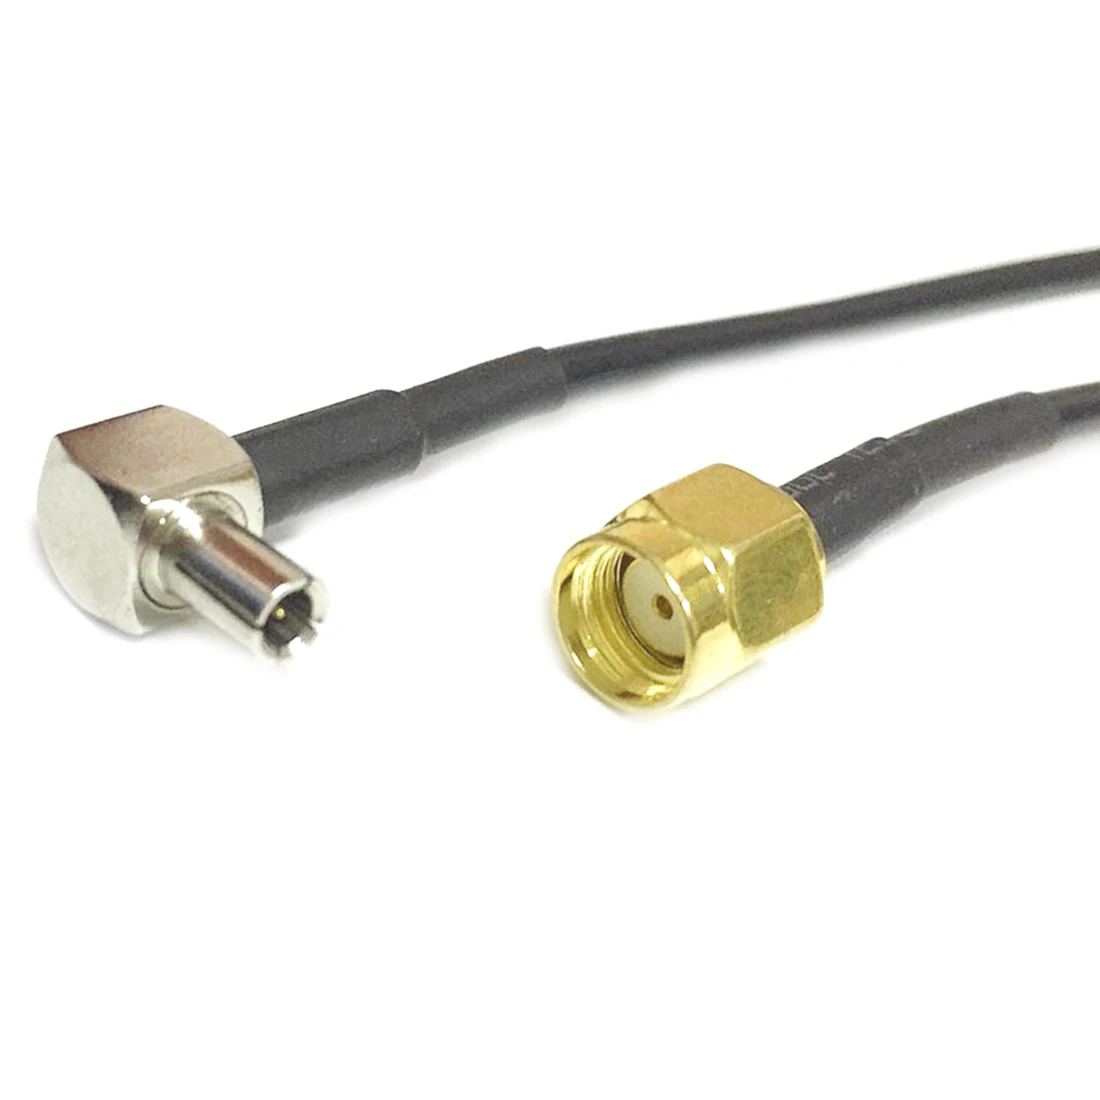 

SMA-TS9 Cable TS9 Male Right Angle to RP SMA Male Plug Pigtail Adapter RG174 10/15/20/30/50/100cm Black for 3G Modem